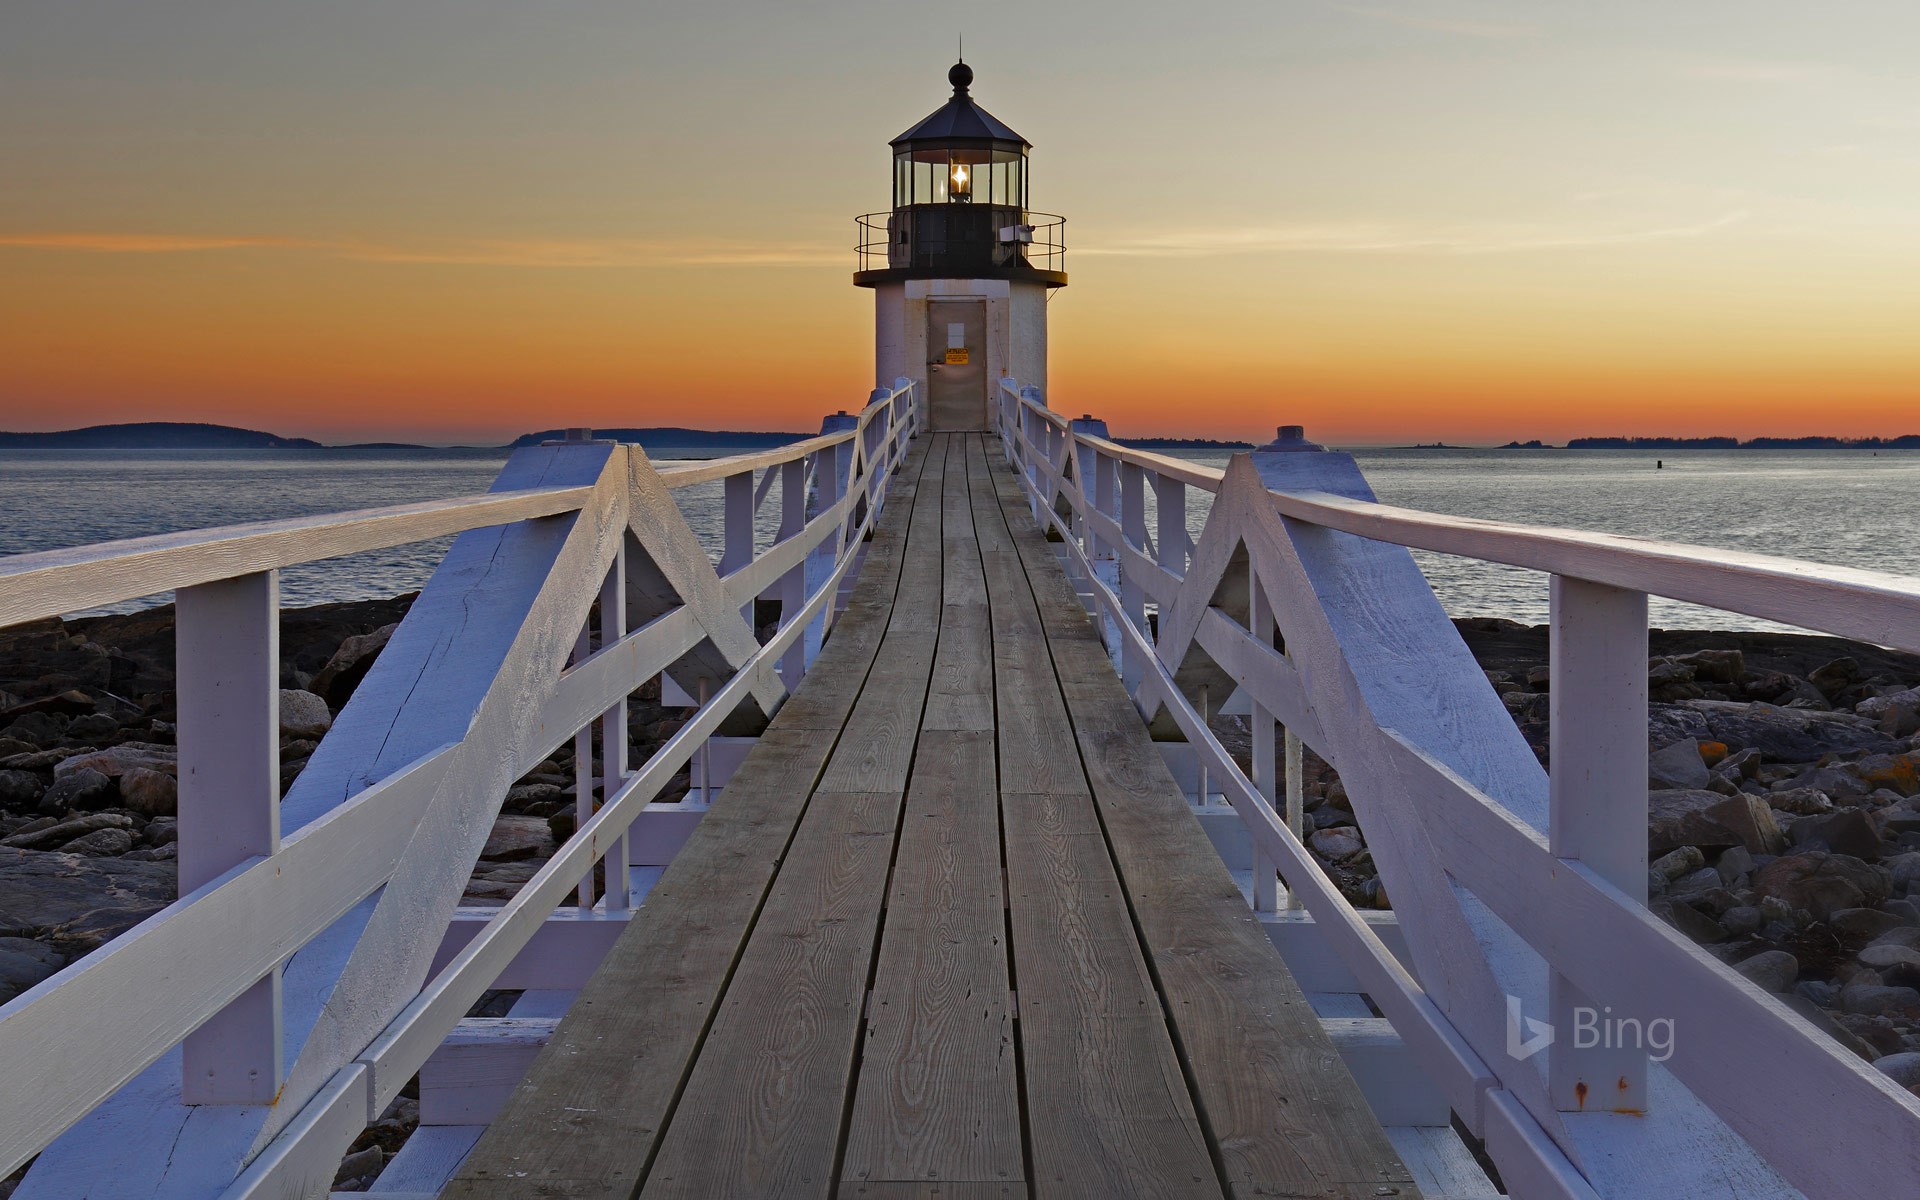 Marshall Point Lighthouse in Port Clyde, Maine